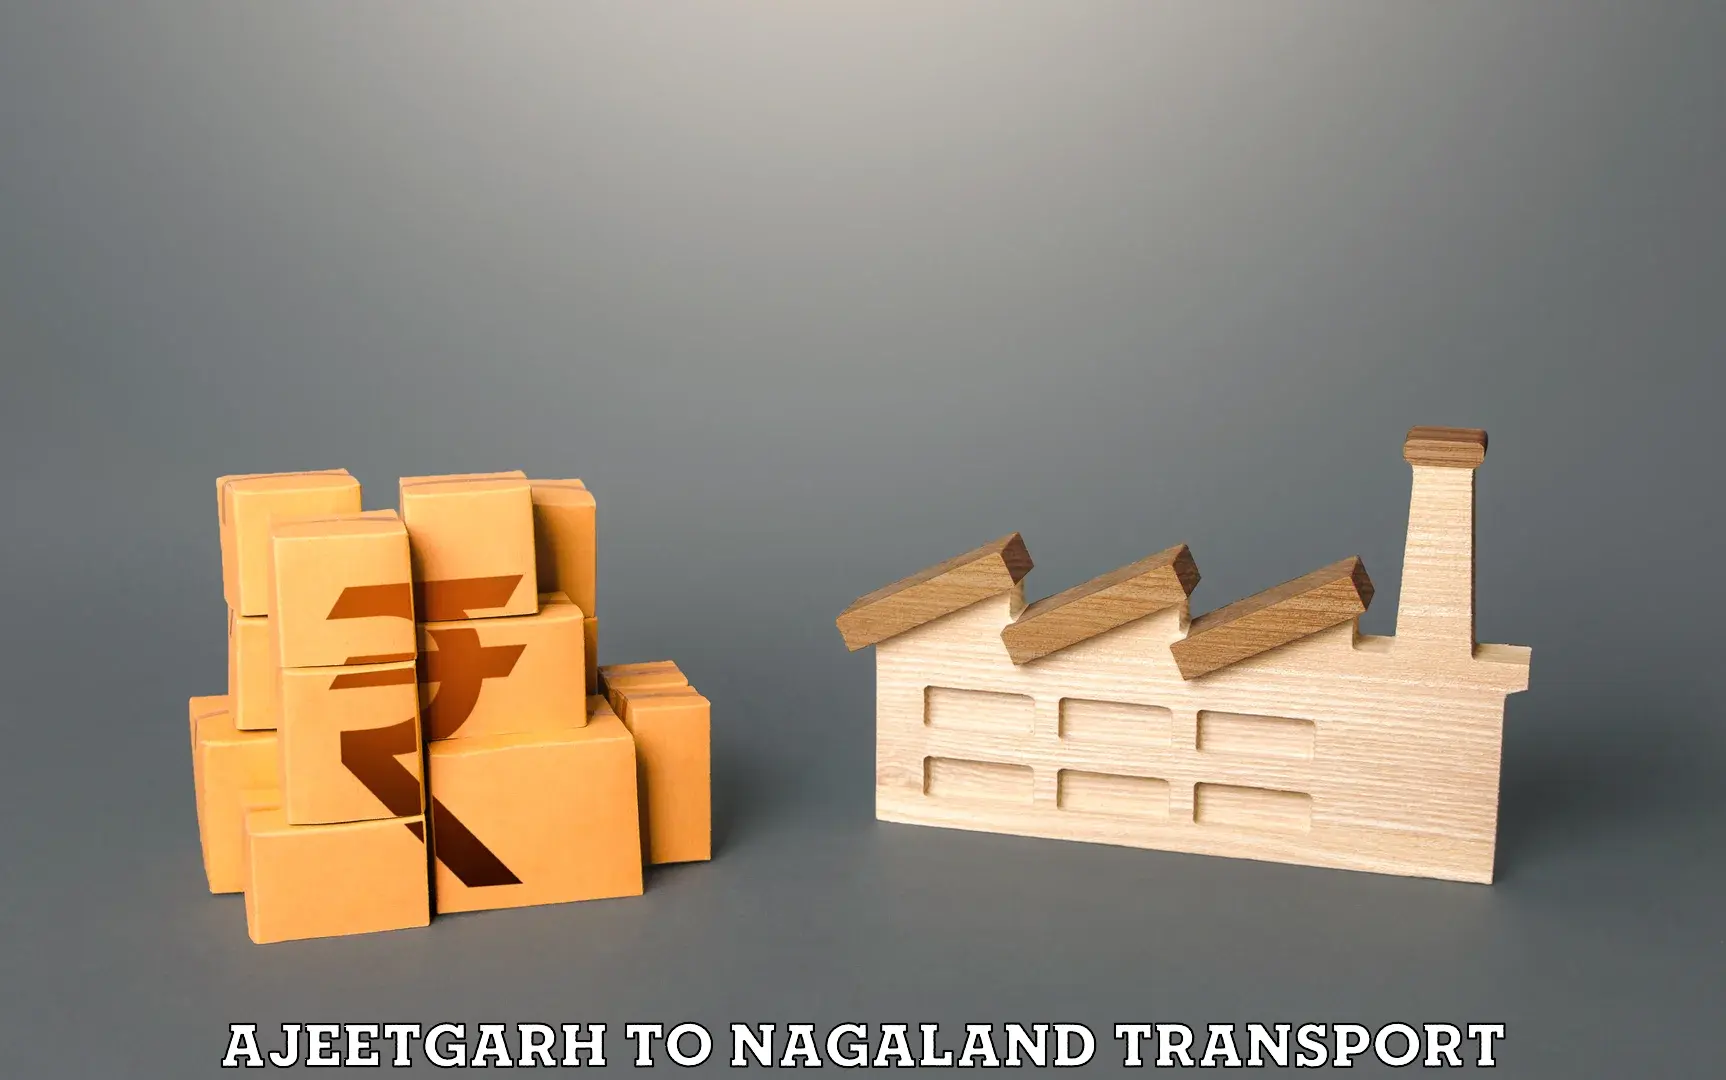 Delivery service Ajeetgarh to Nagaland